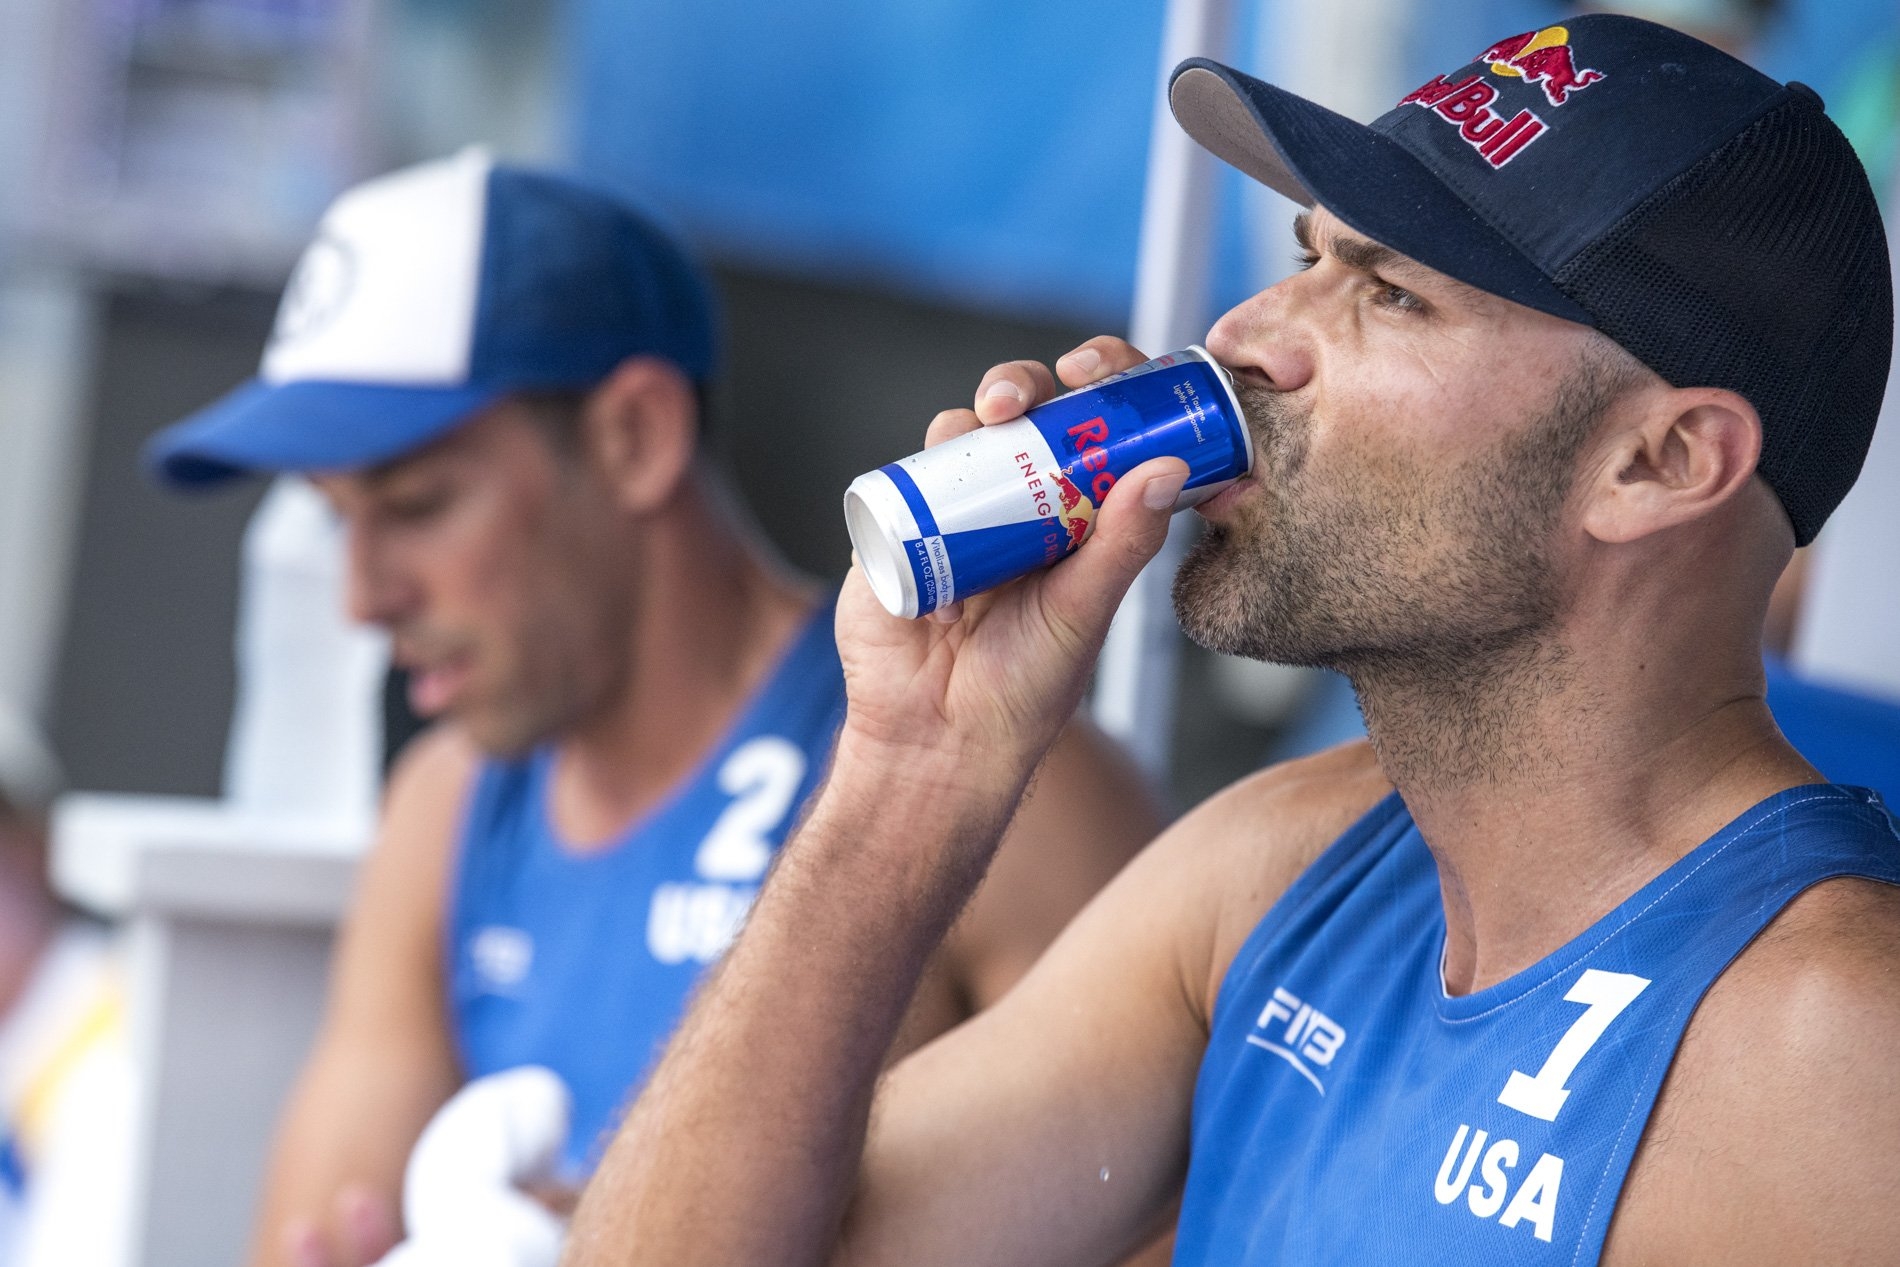 Local heroes Dalhausser and Lucena will do their things at the Red Bull Beach Arena again